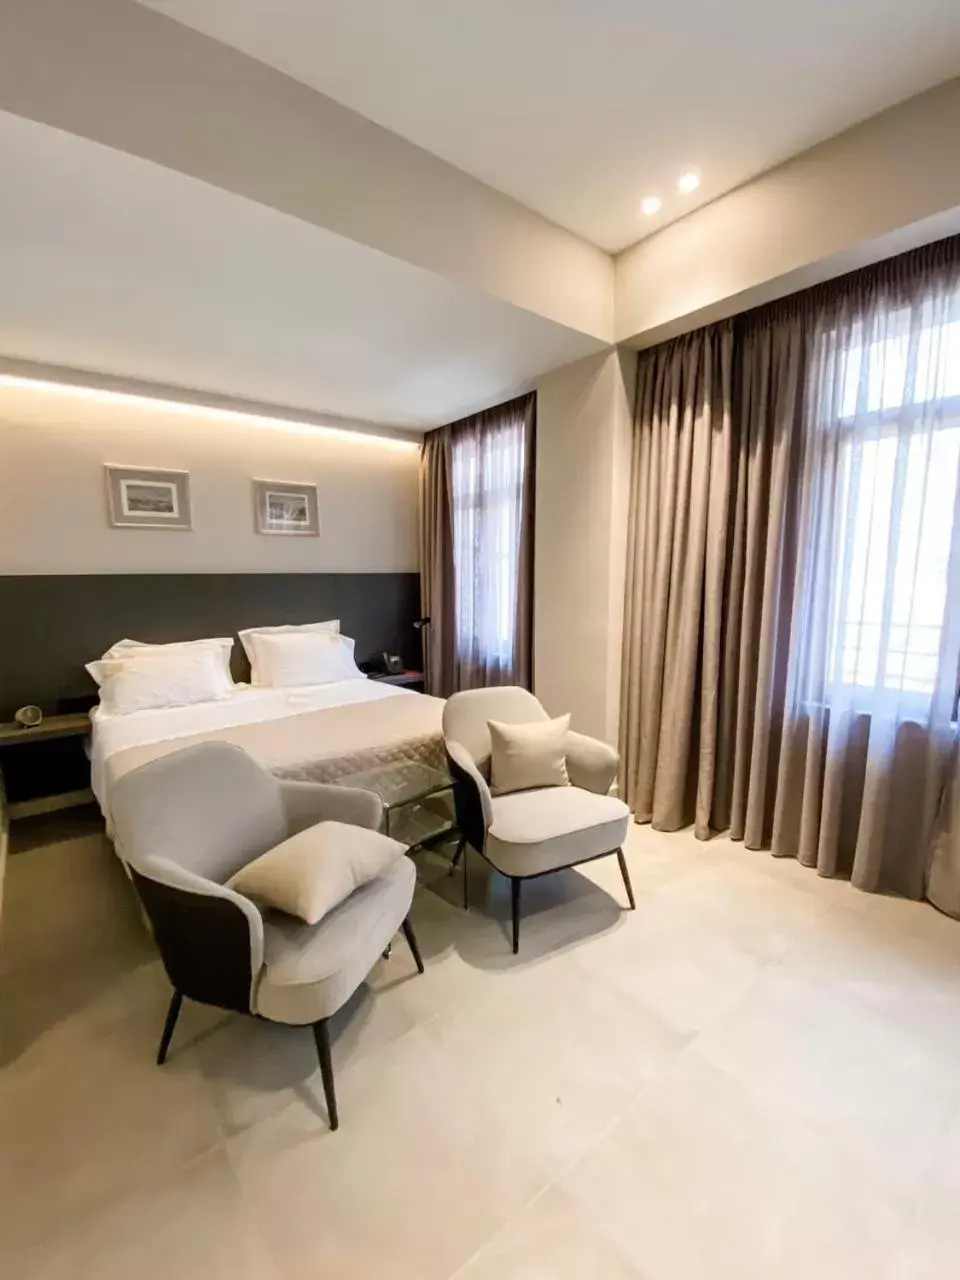 Executive Suite in Royalty Hotel Athens